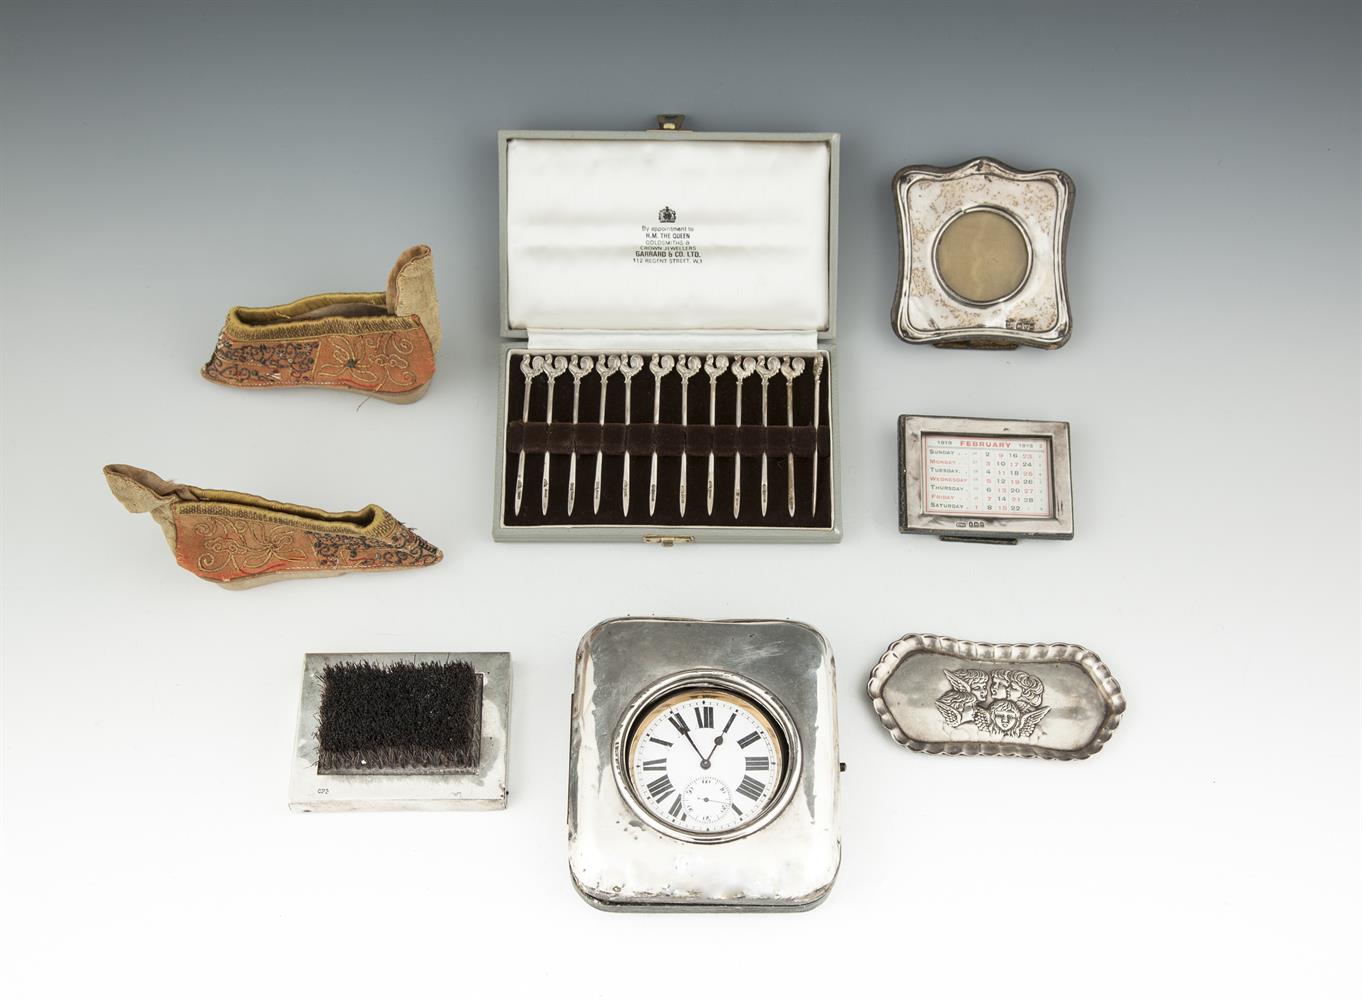 AN EDWARDIAN SILVER CASED DESK WATCH, Birmingham 1907; together with a miniature silver cased desk